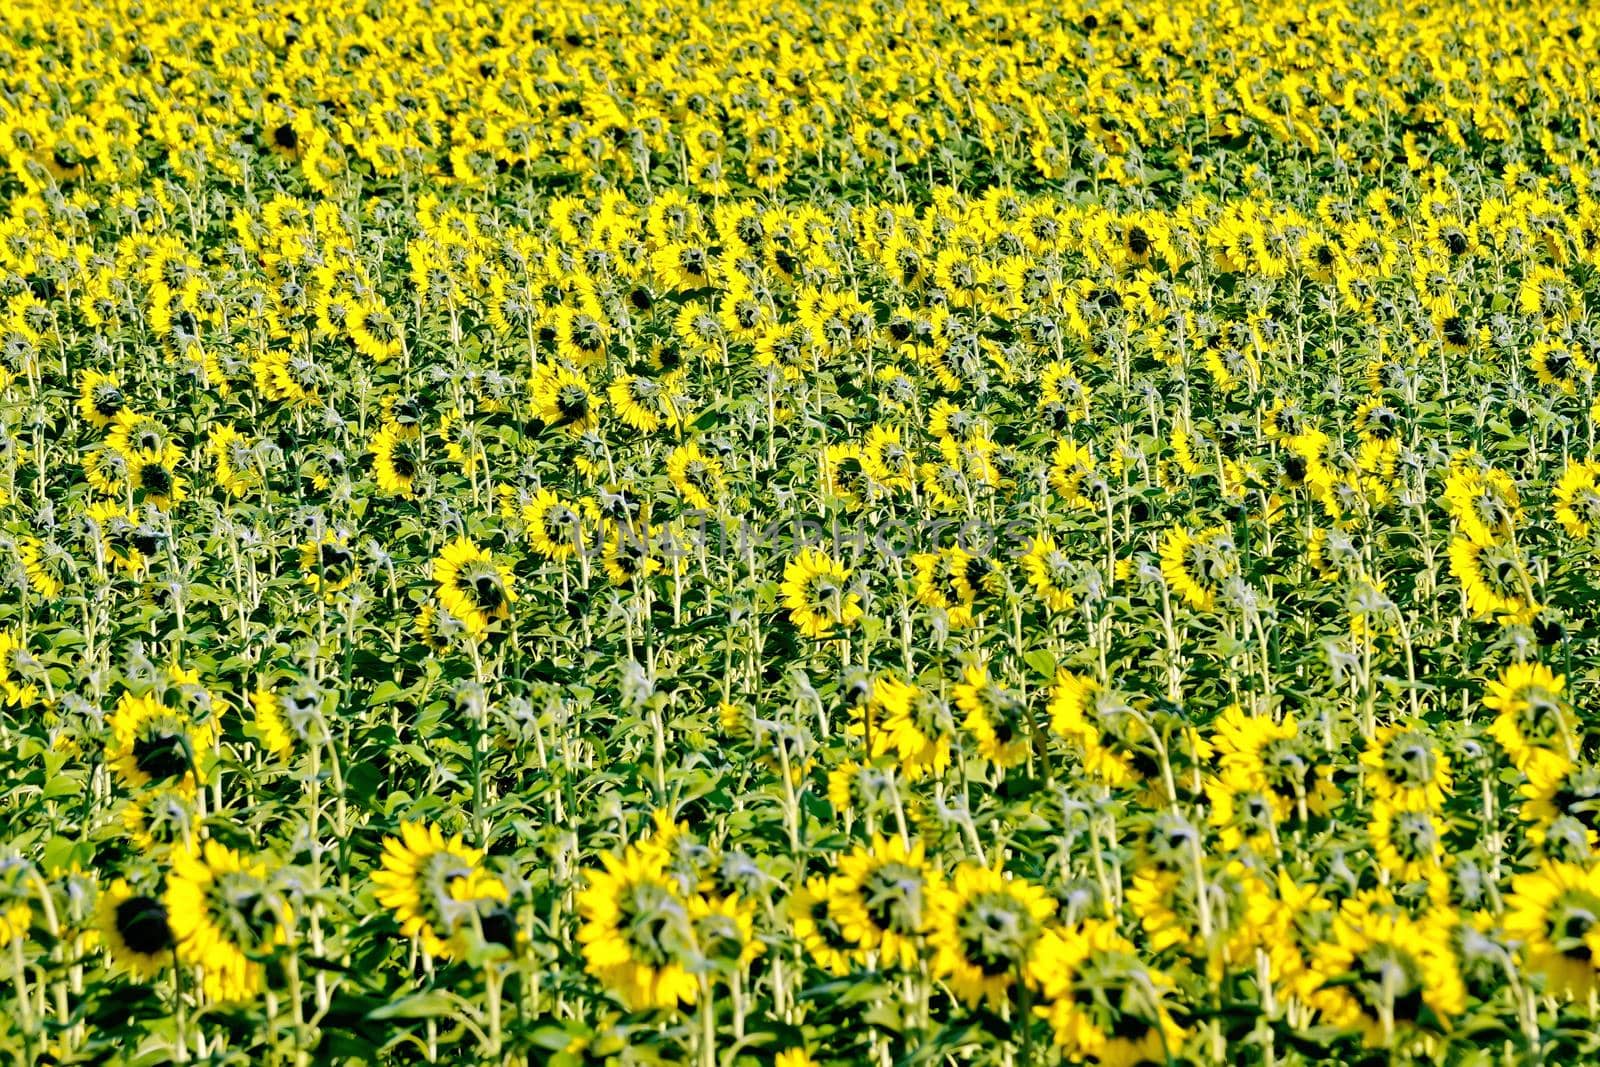 Field with yellow flowers of sunflower and green leaves